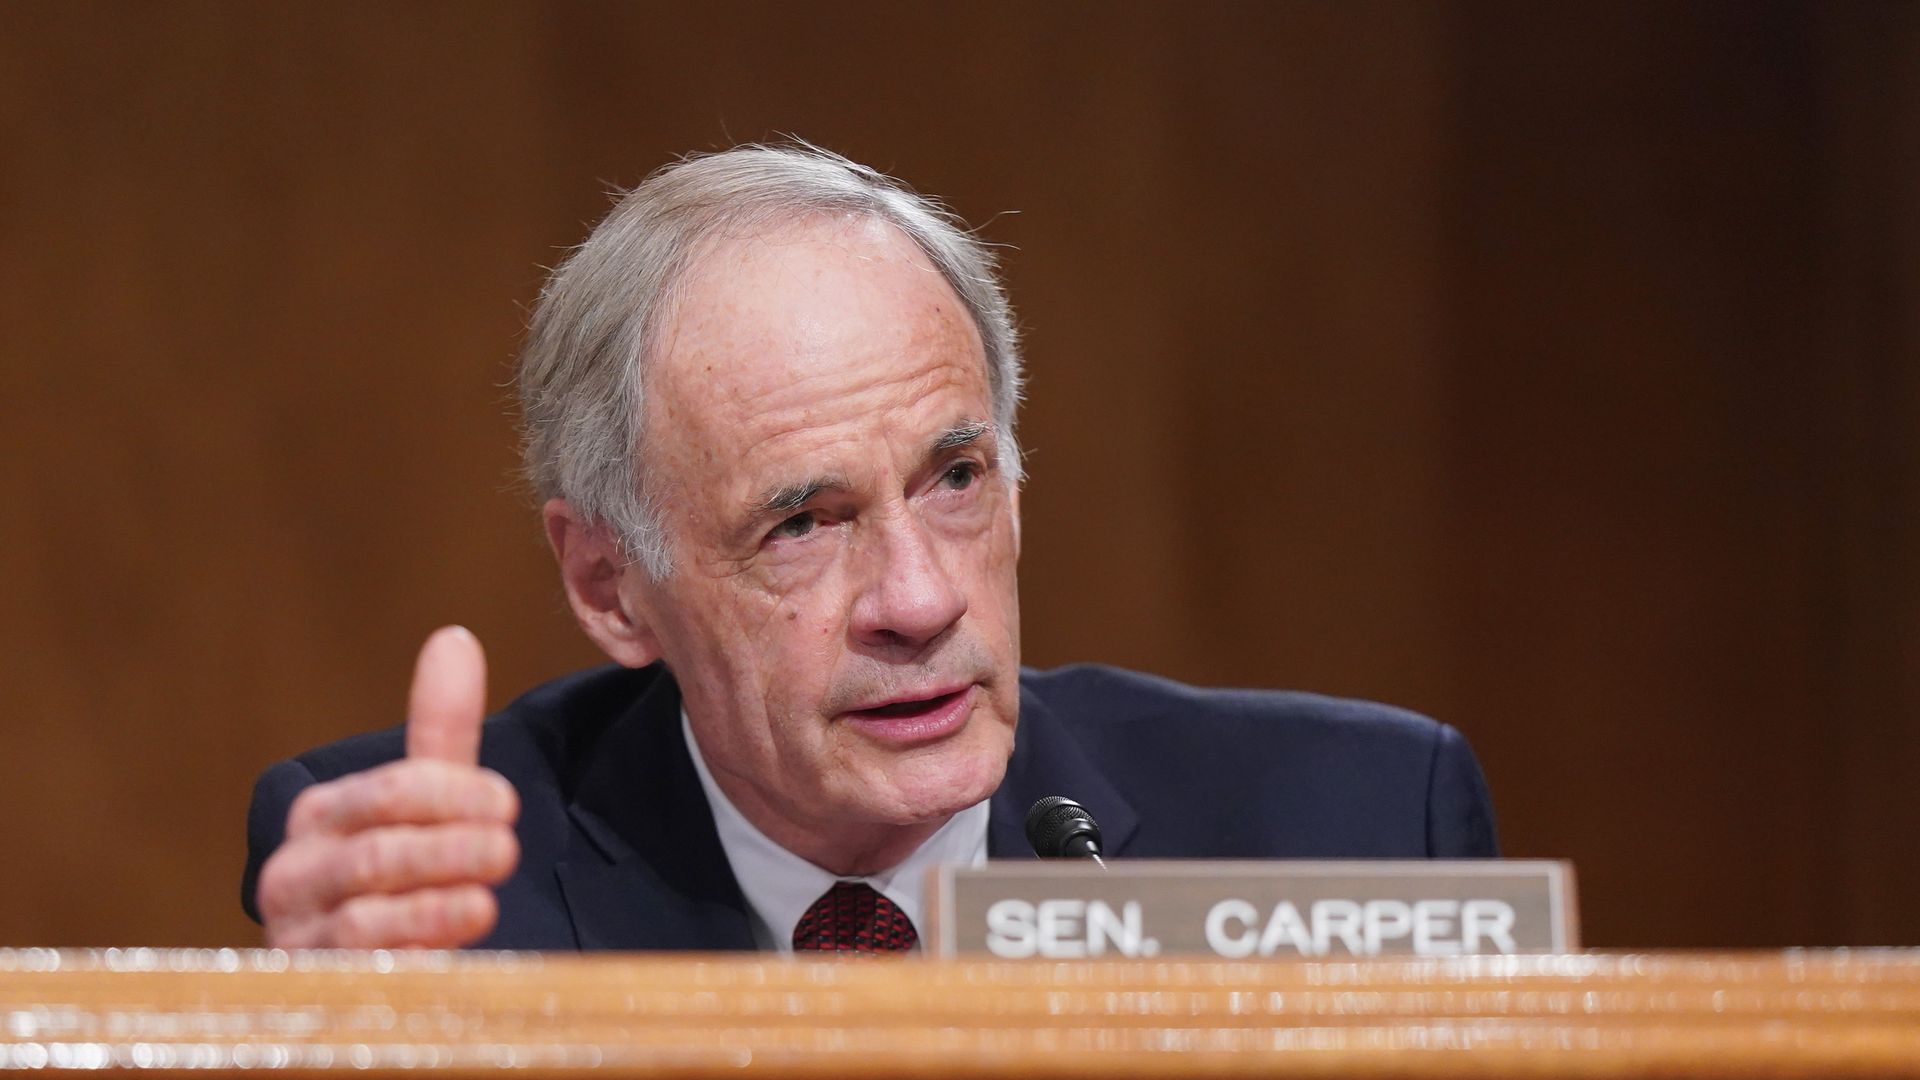 Sen. Tom Carper is seen speaking during a congressional hearing.